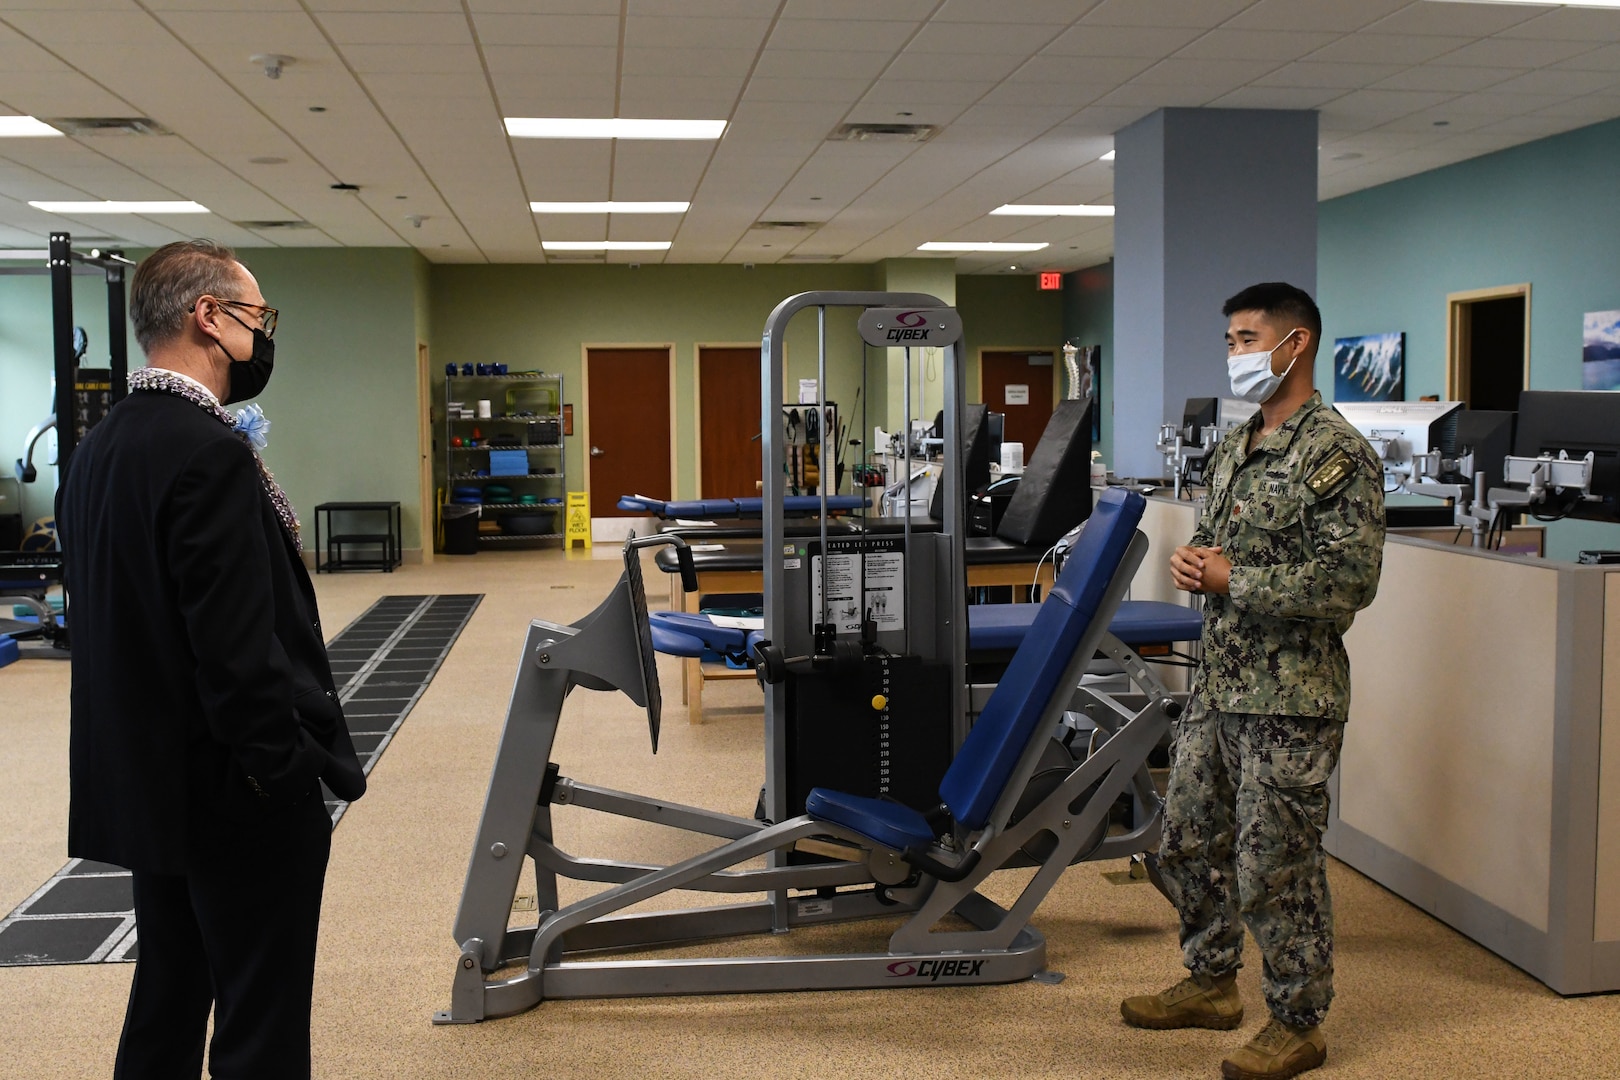 Lein meets with Navy medical staff.